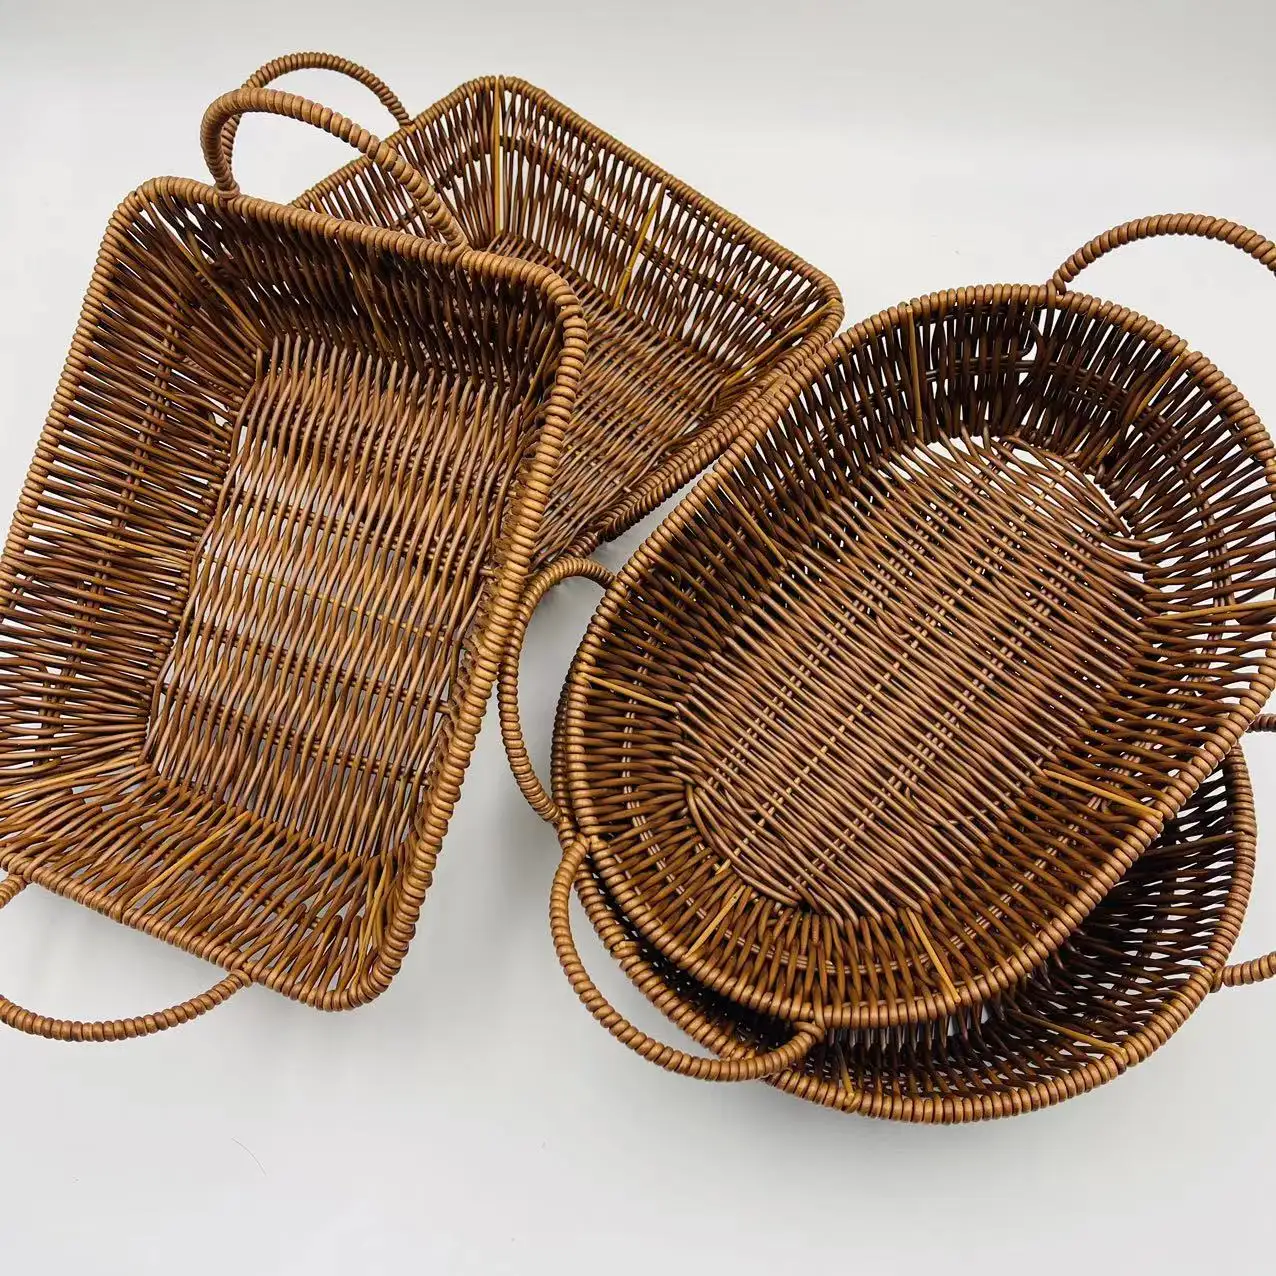 High Quality Wicker Stackable Storage Baskets Rattan Basket Weaving Craft Rattan Tray